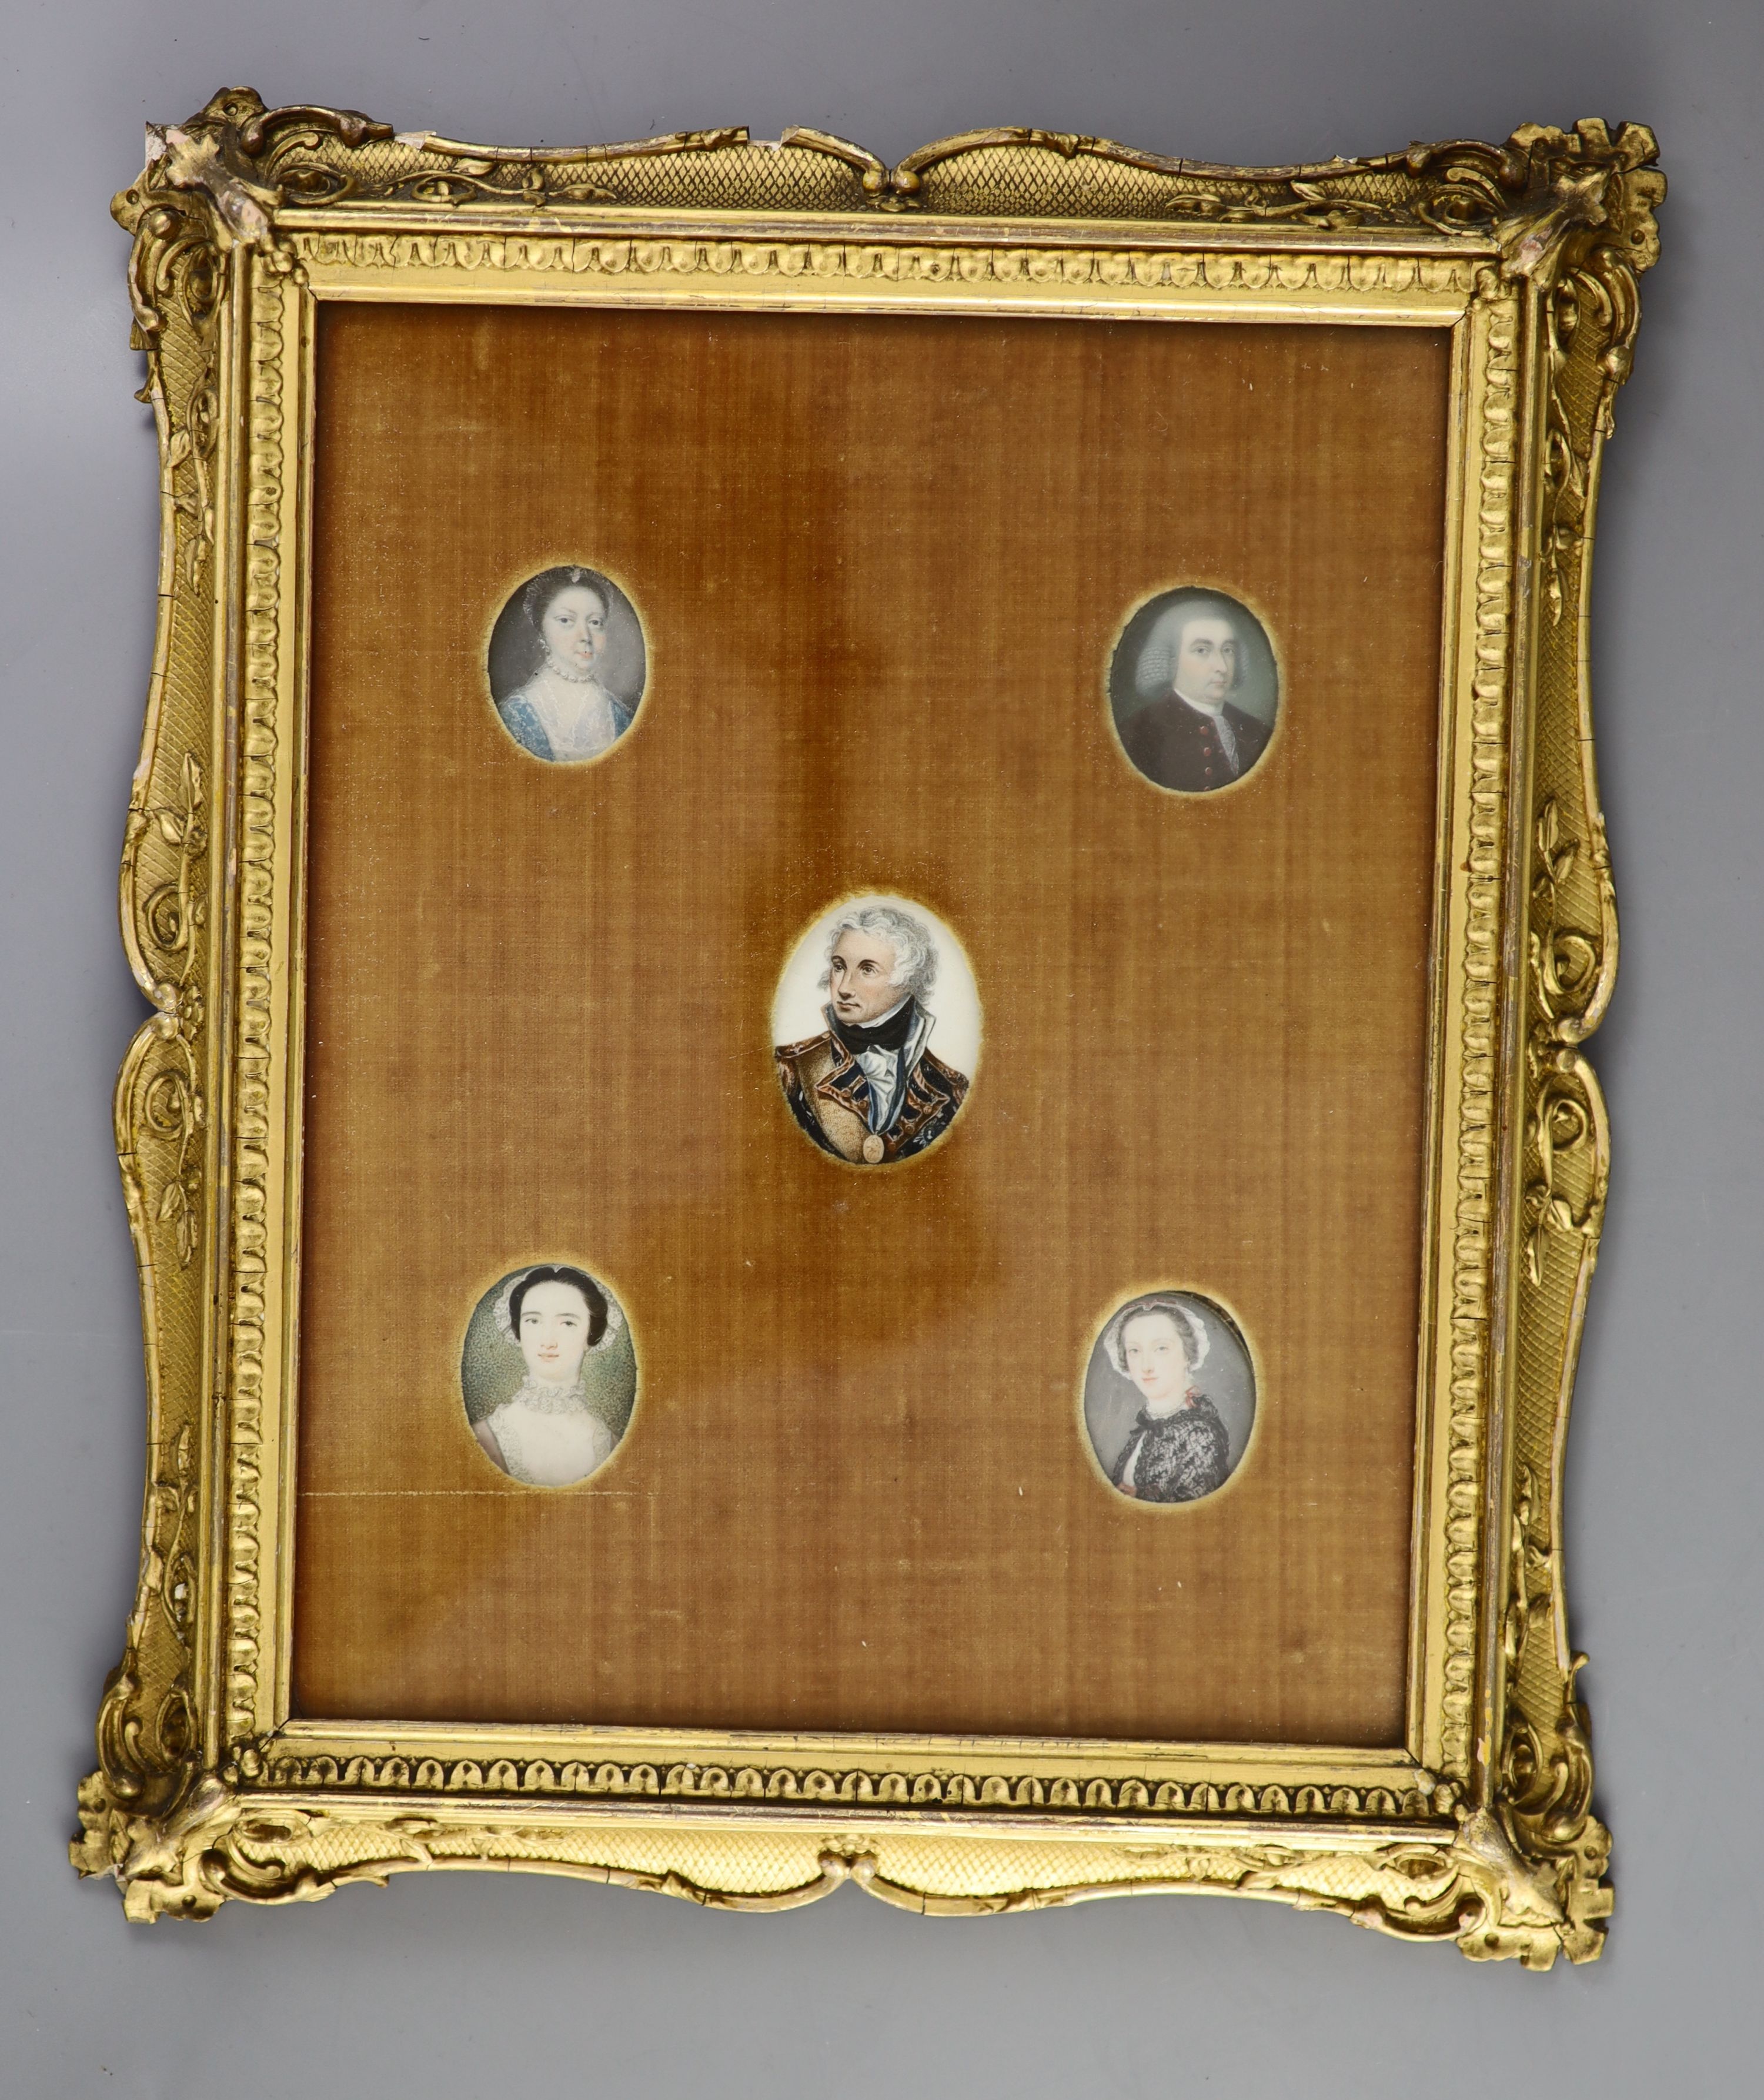 Irish School circa 1800 , Miniature portraits of members of the Burges family and of Lord Nelson, watercolour on ivory, Largest 5 x 3.5 cm